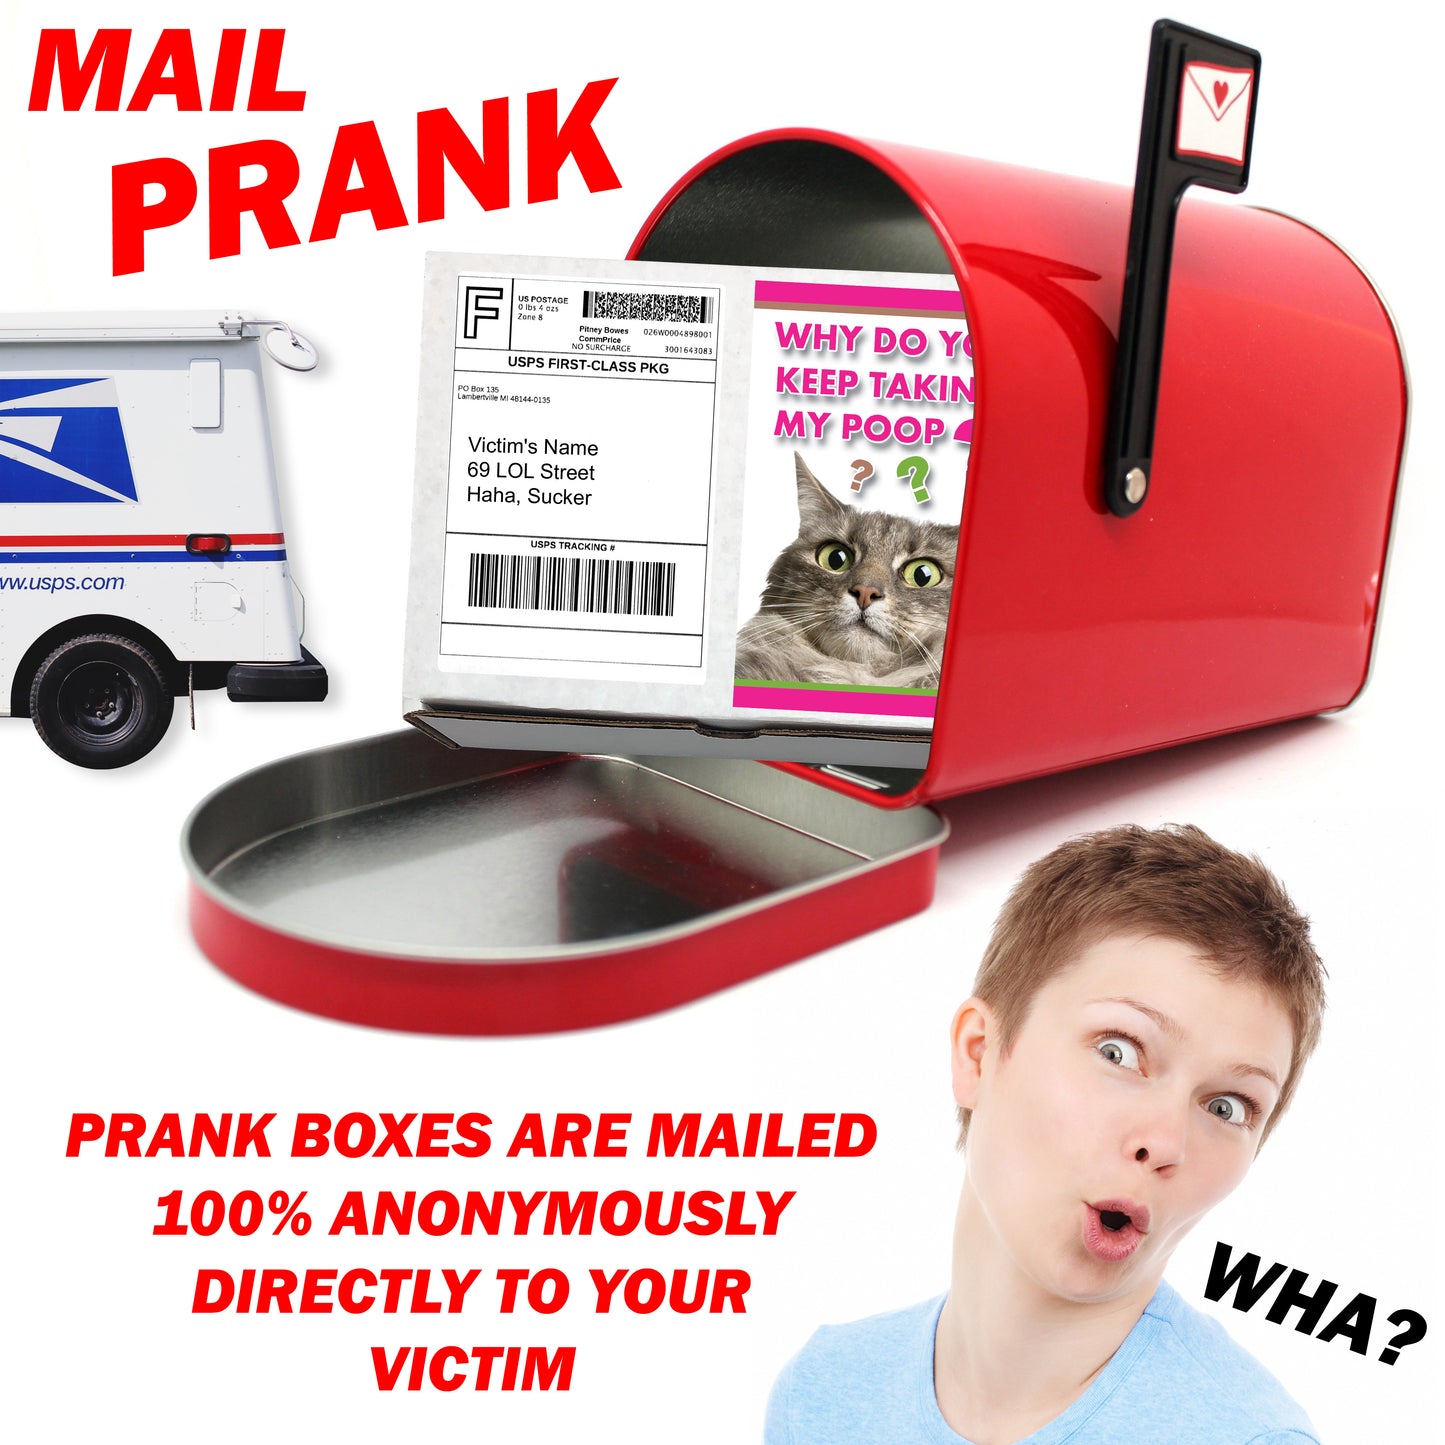 Why Do You Keep Taking My Poop Prank Mail